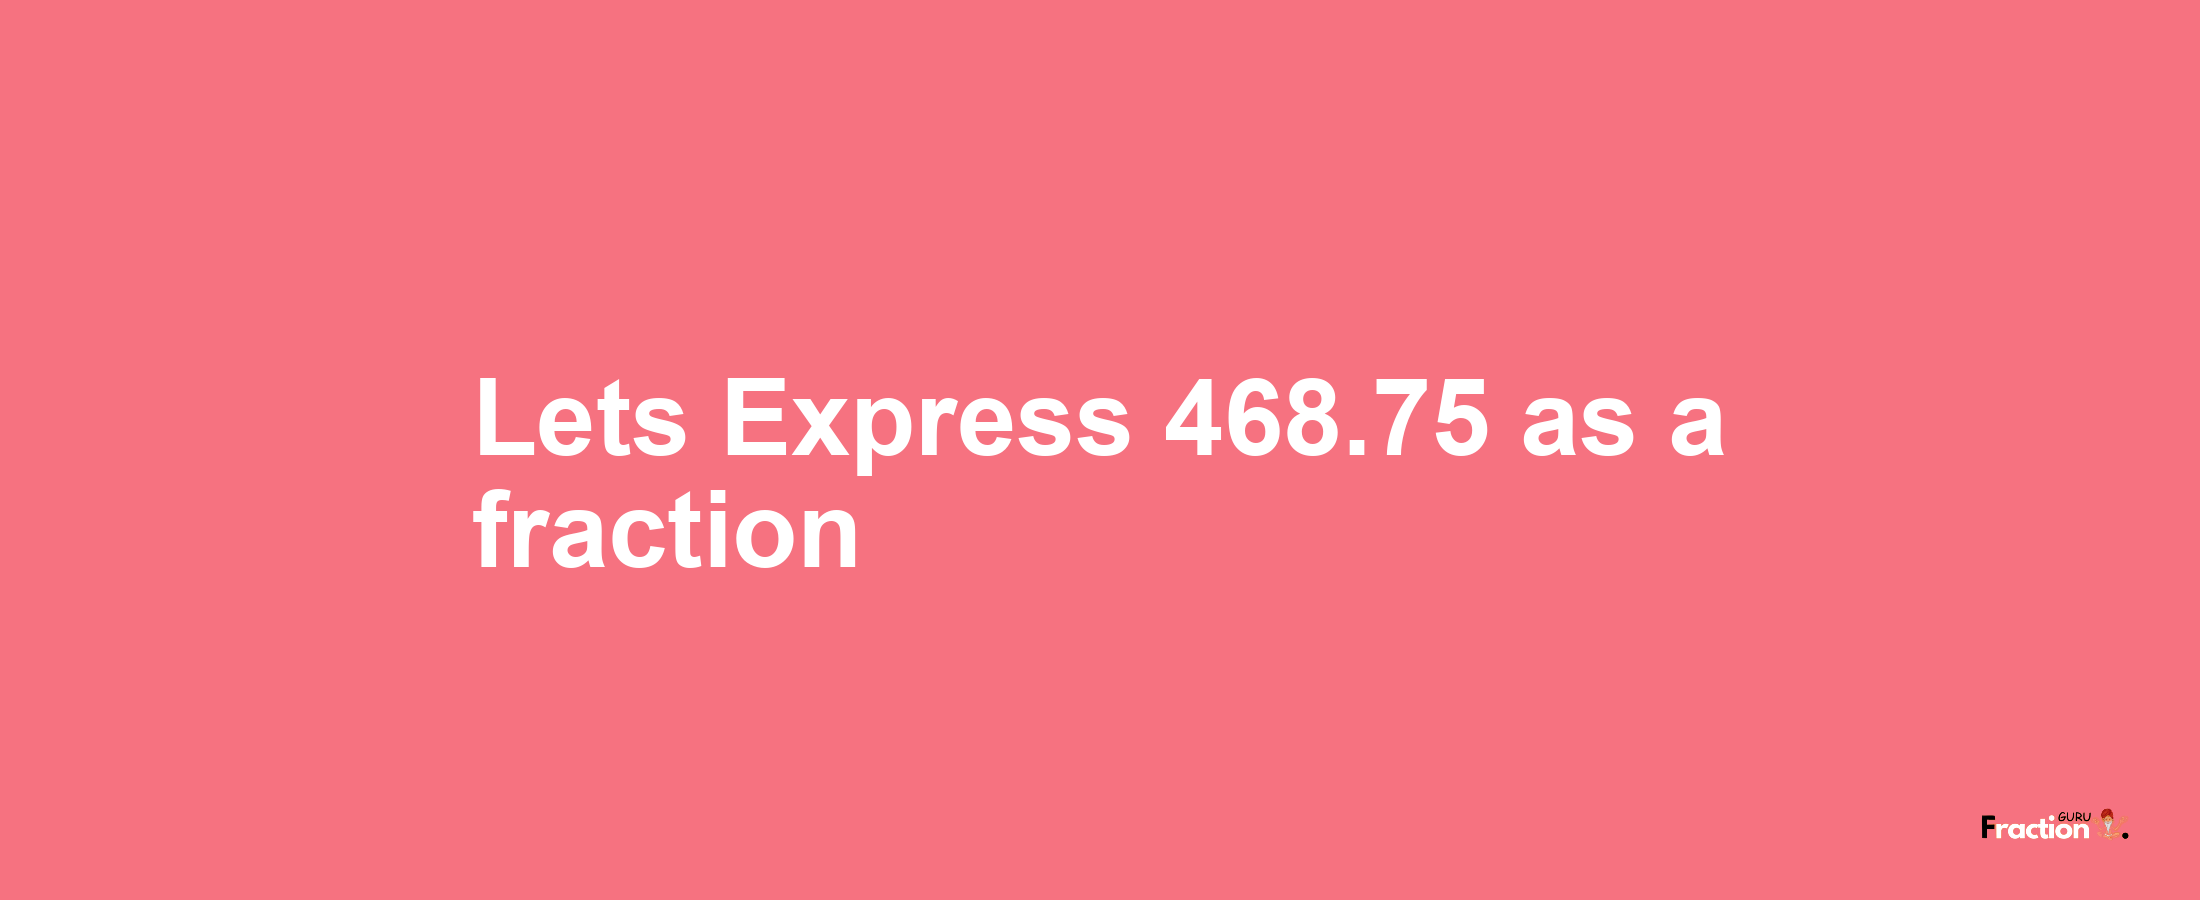 Lets Express 468.75 as afraction